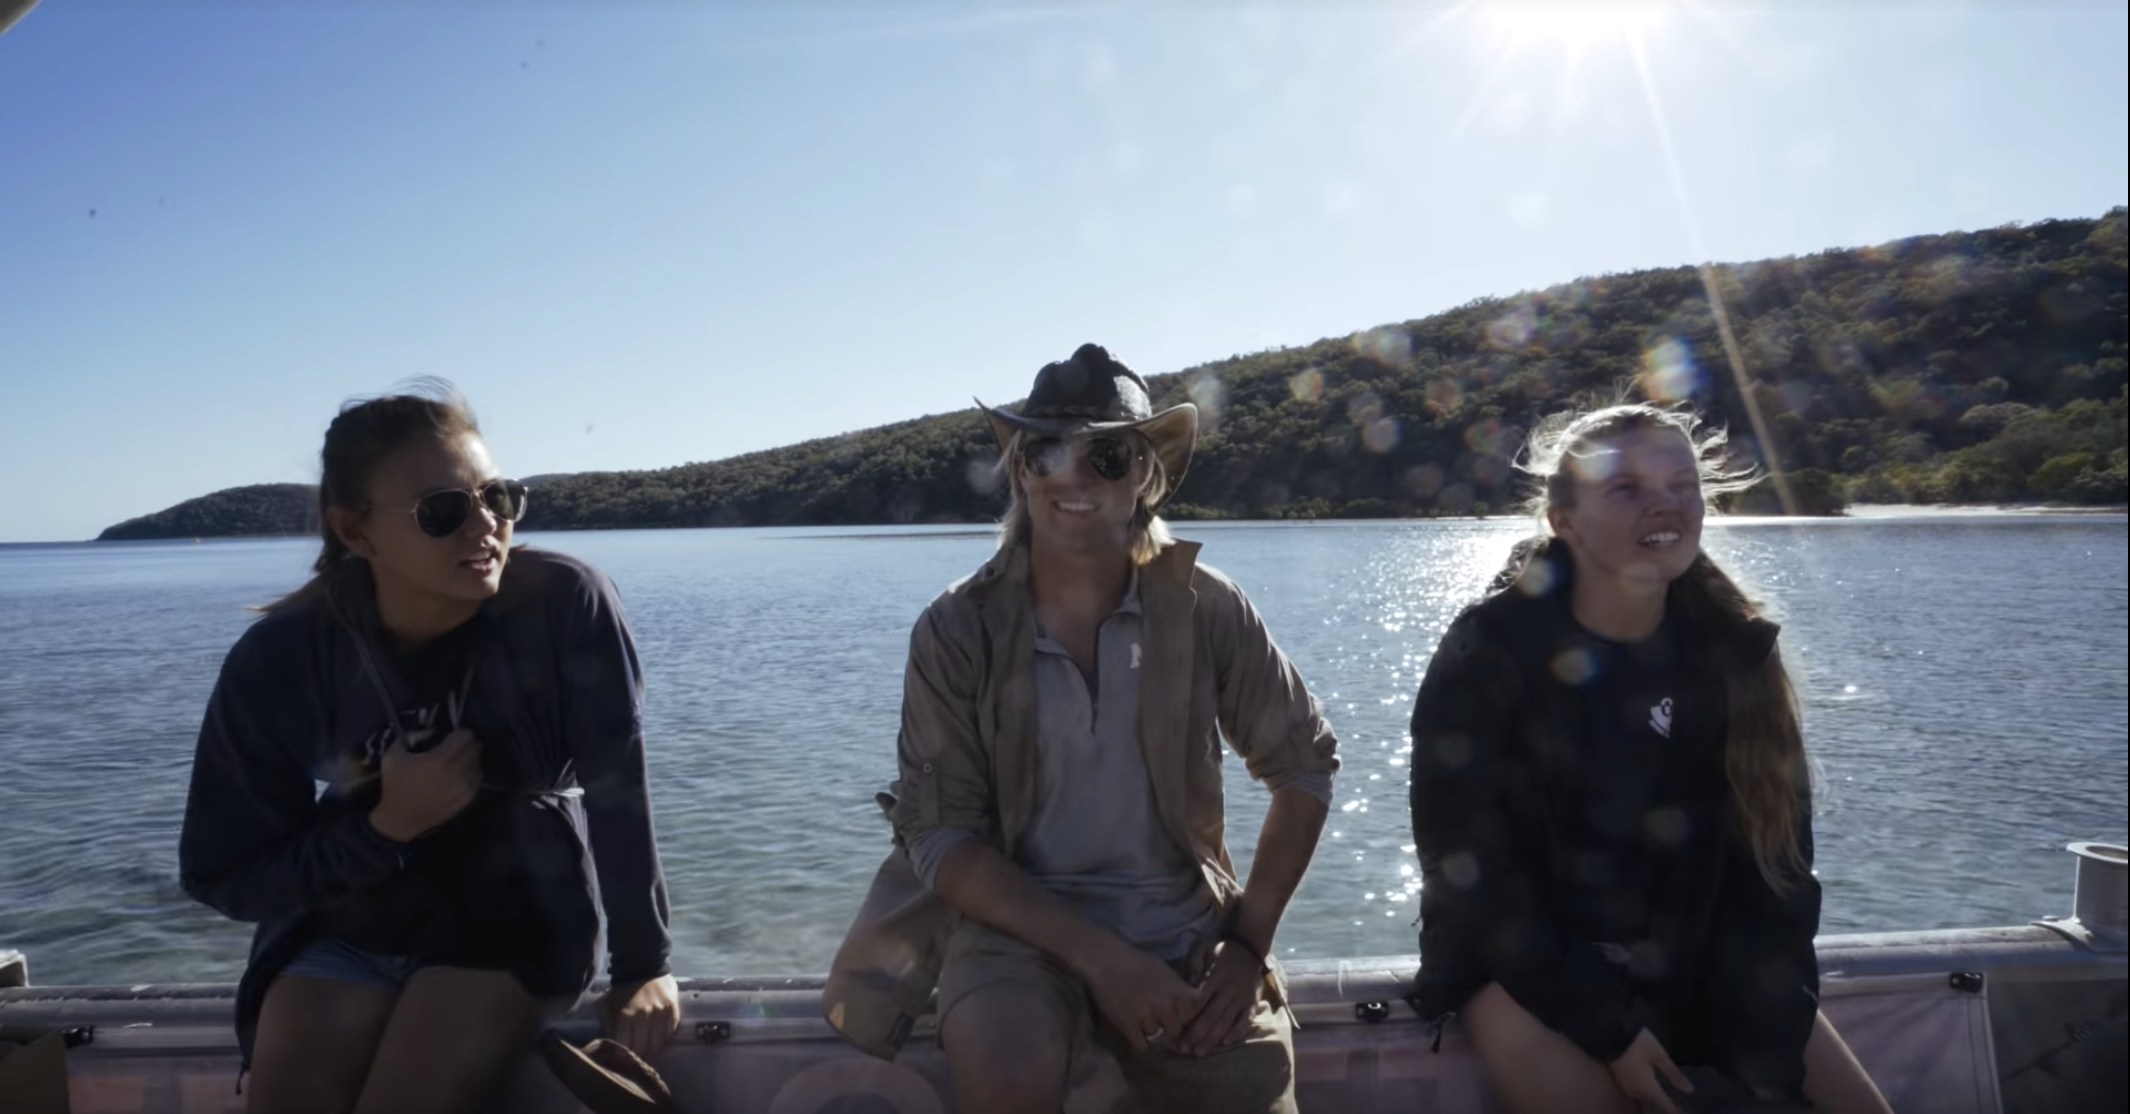 Three students on a boat in Australia